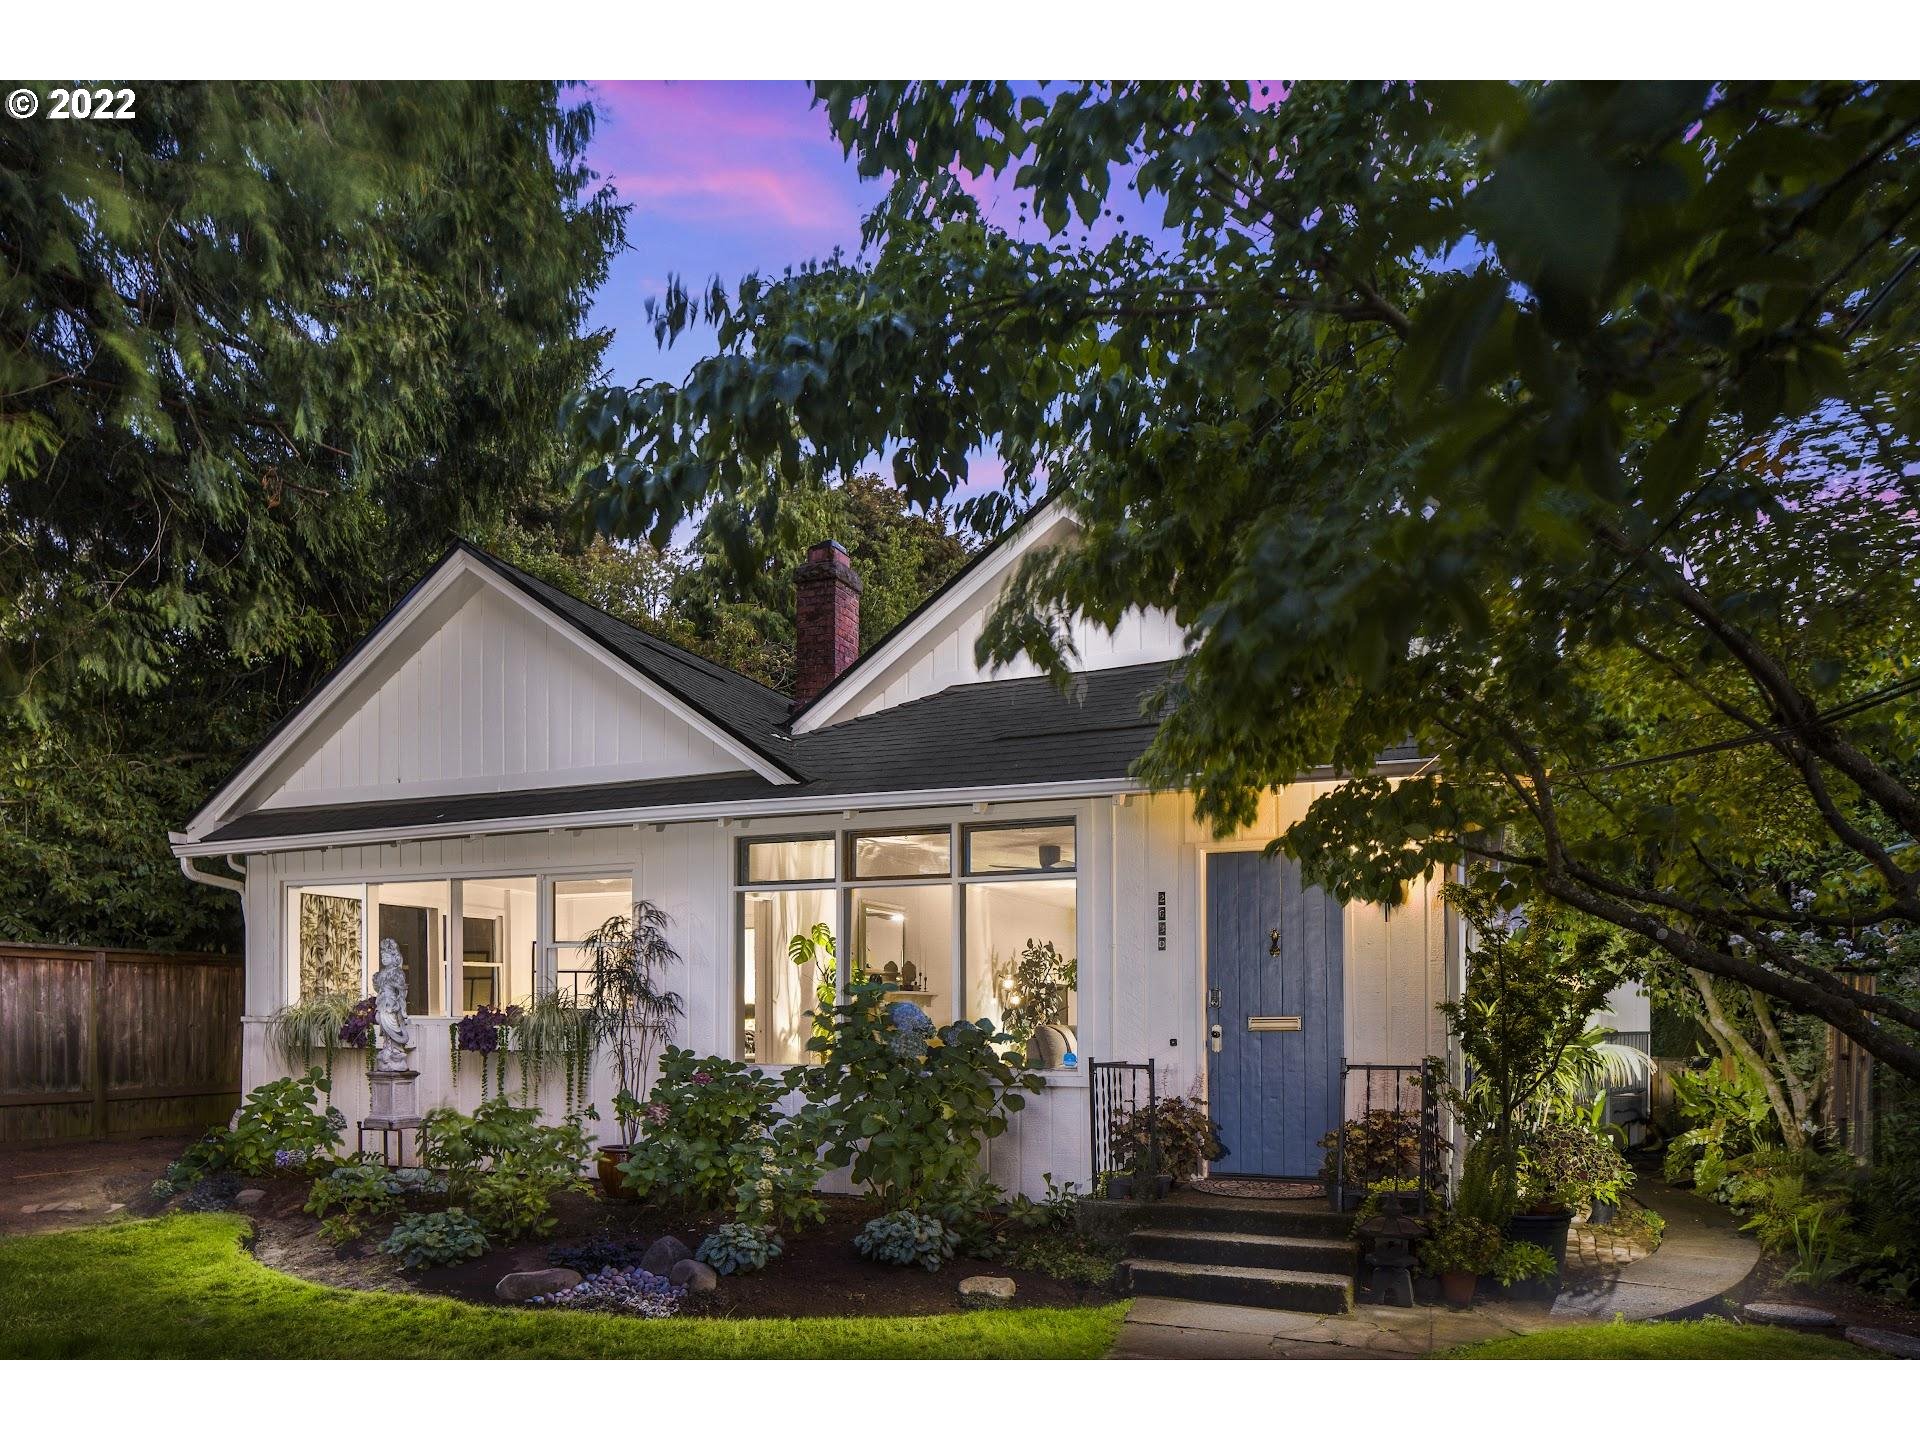 Perched high, this remodeled cottage is tucked in a private setting. Open living/dining, 3 beds, sunroom, spa-like bathroom, partially finished basement for future build-out. Ideal mix of historic charm & modern esthetics: decorative woodwork, shiplap, & beamed ceilings. Updated kitchen w/ eat bar, skylight, subway tile & premium appliances. Private rooftop deck for entertaining. Driveway & parking access through quiet Montgomery St + 3 park spots. Close to downtown & blocks to Washington Park. [Home Energy Score = 7. HES Report at https://rpt.greenbuildingregistry.com/hes/OR10205213]